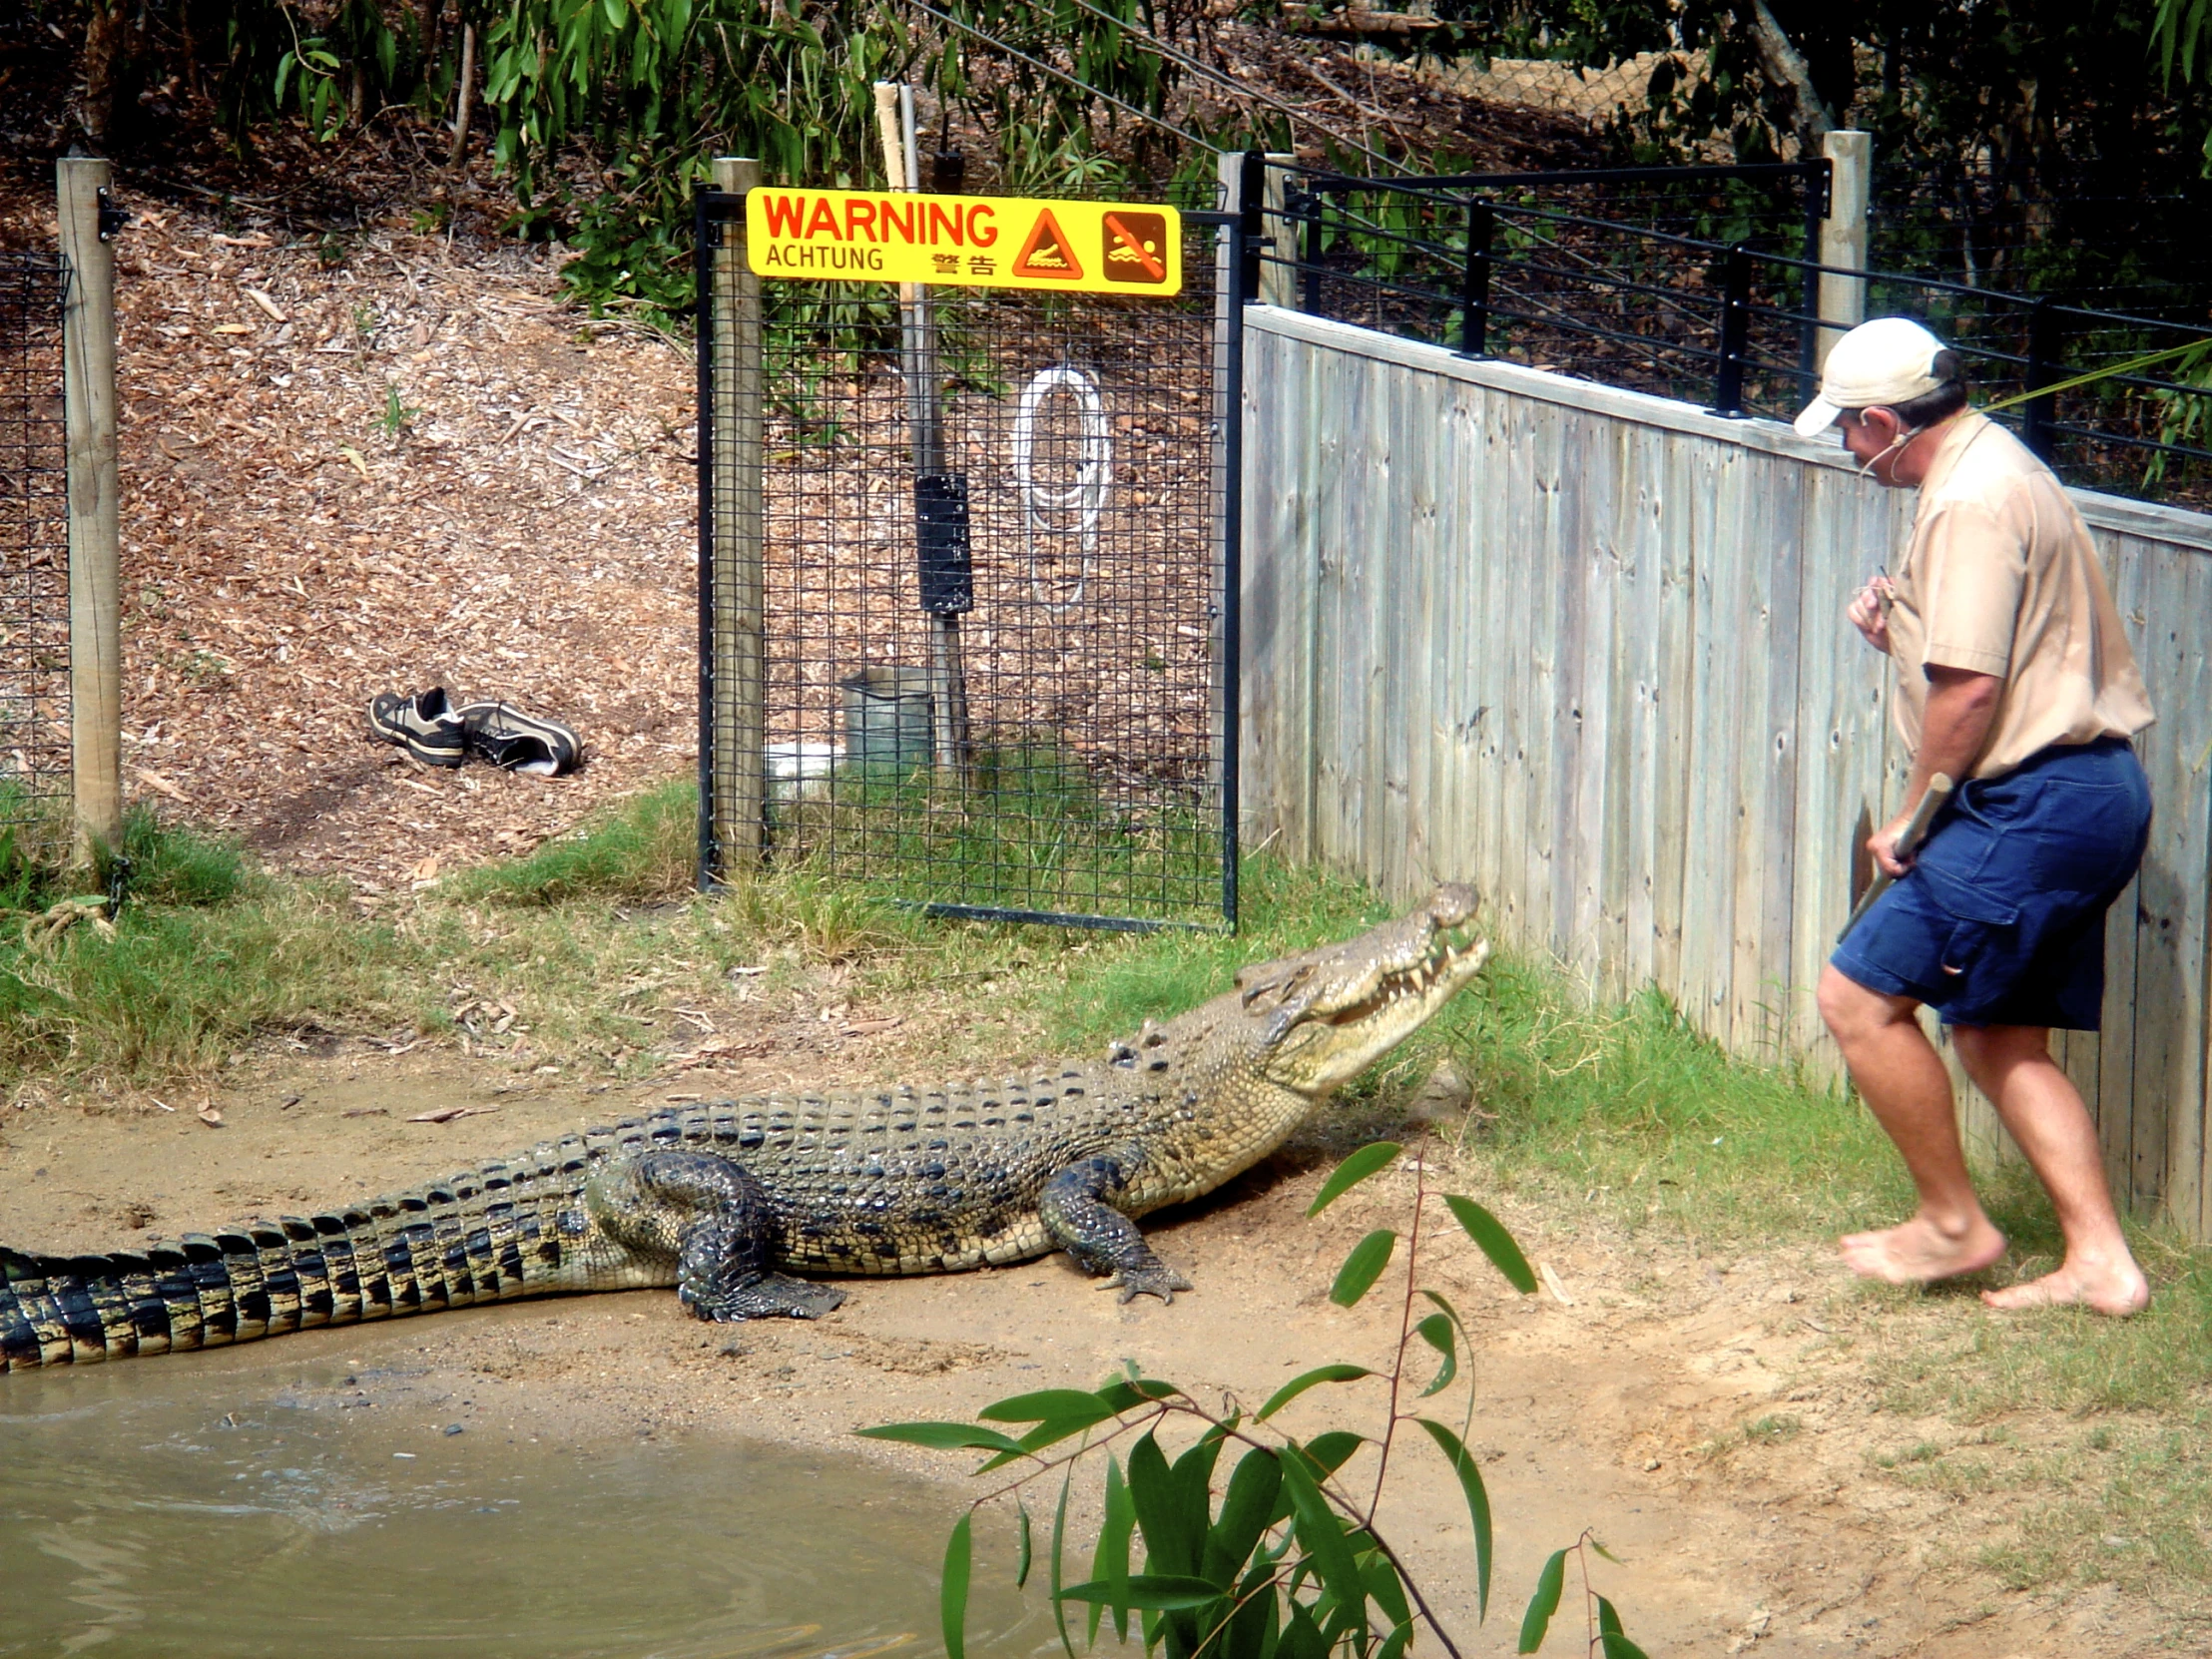 a person standing next to an alligator in the dirt